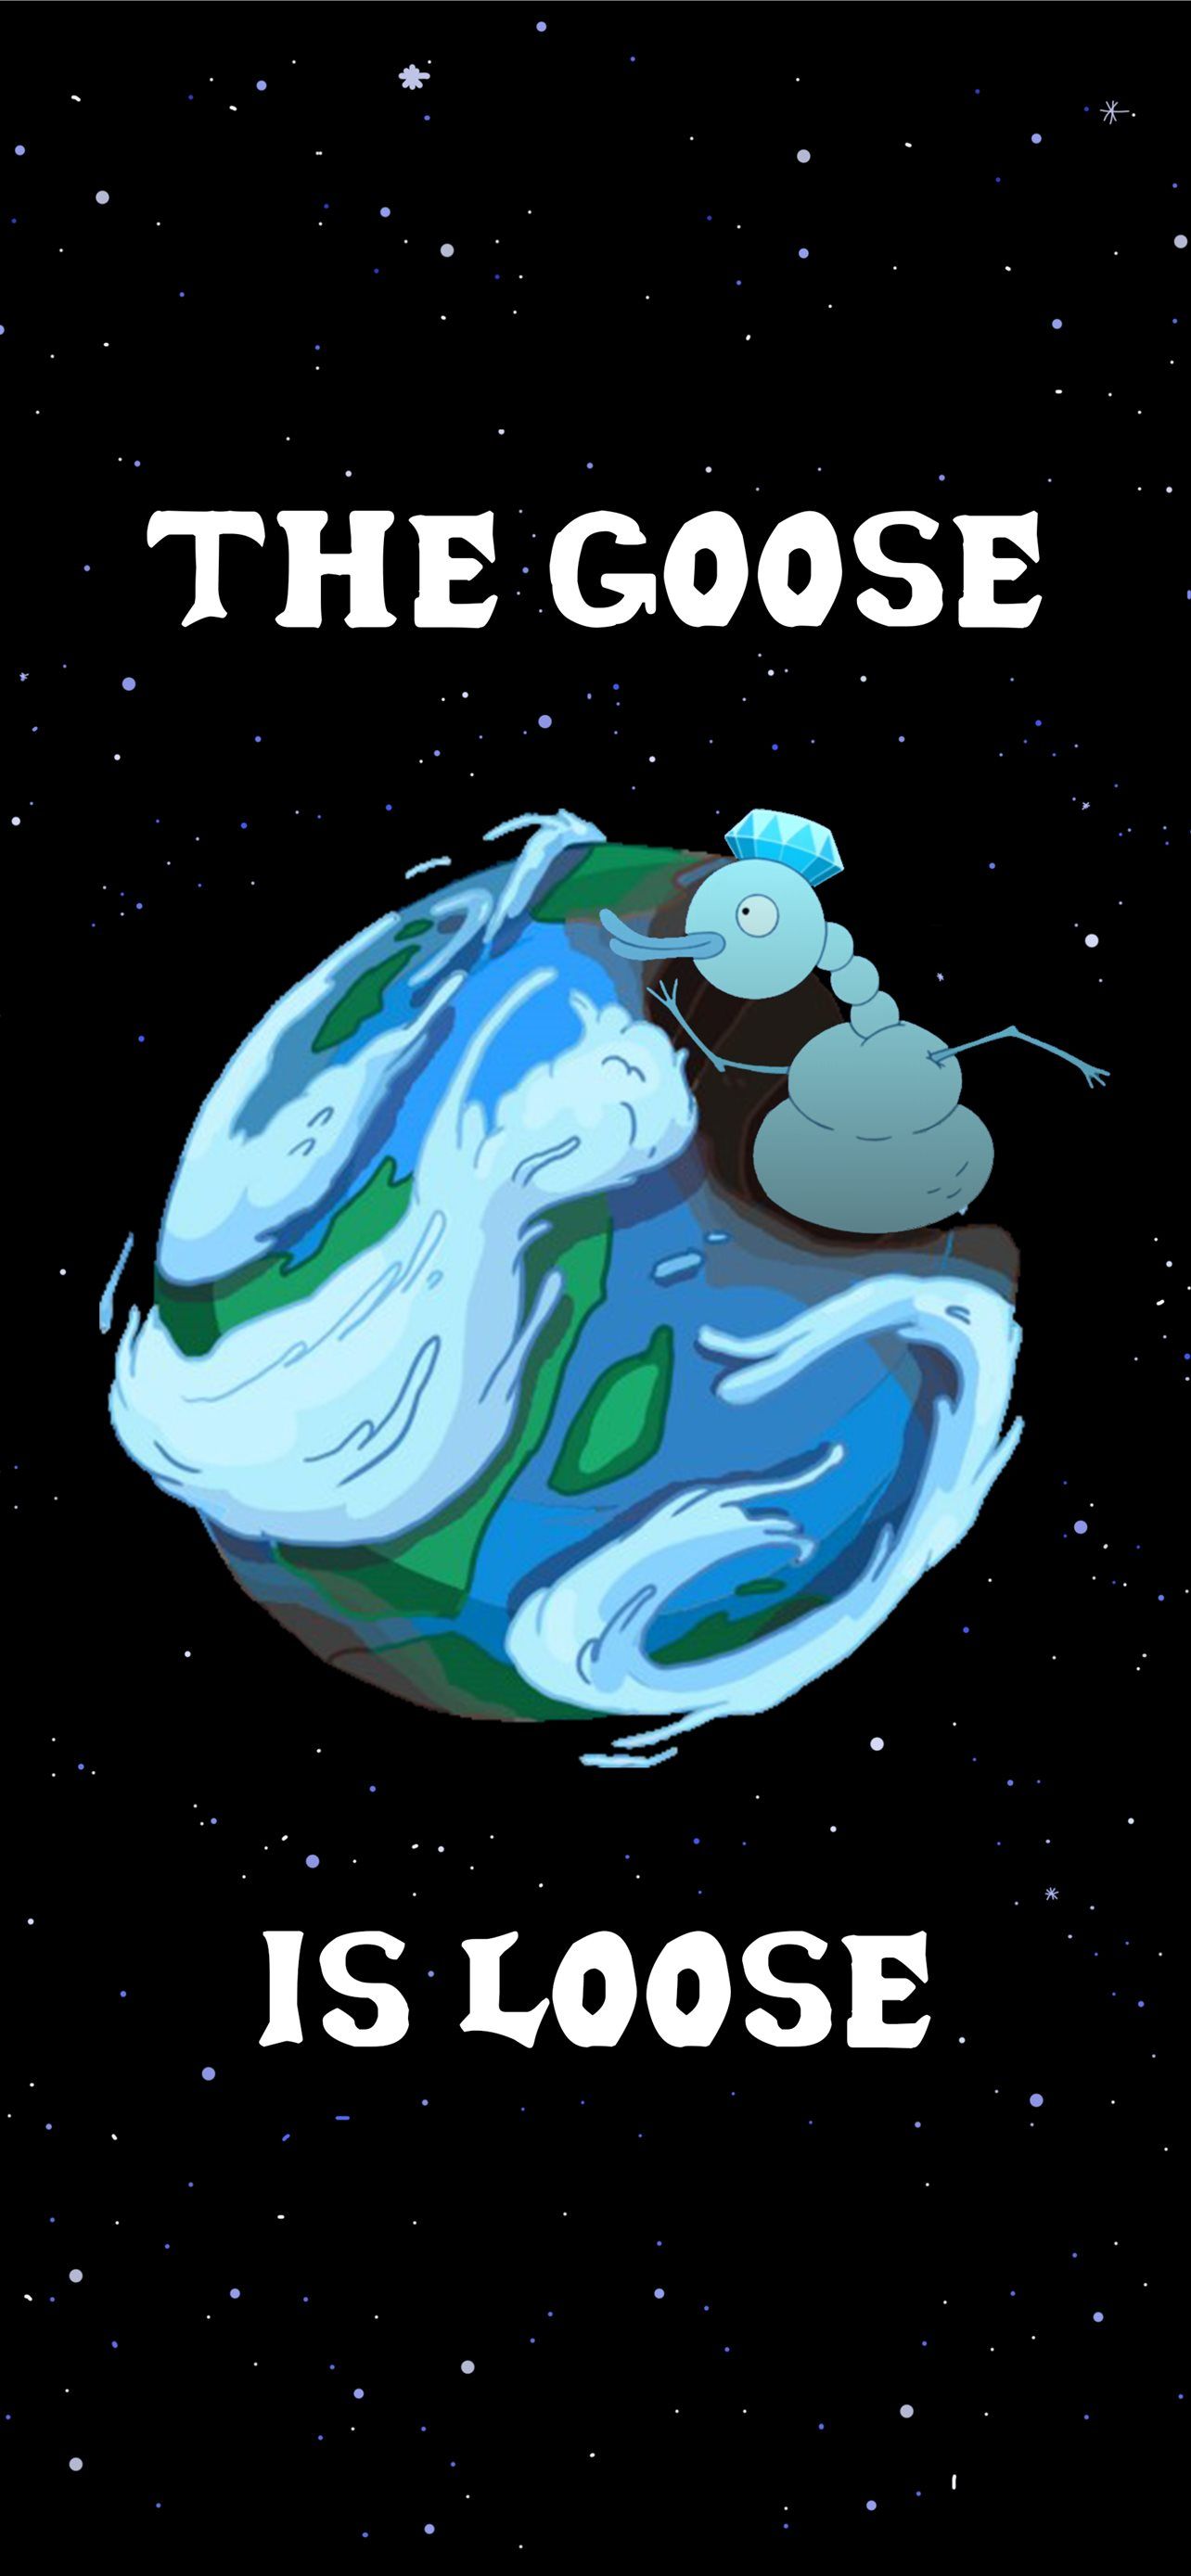 A cartoon goose standing on the earth with the words 